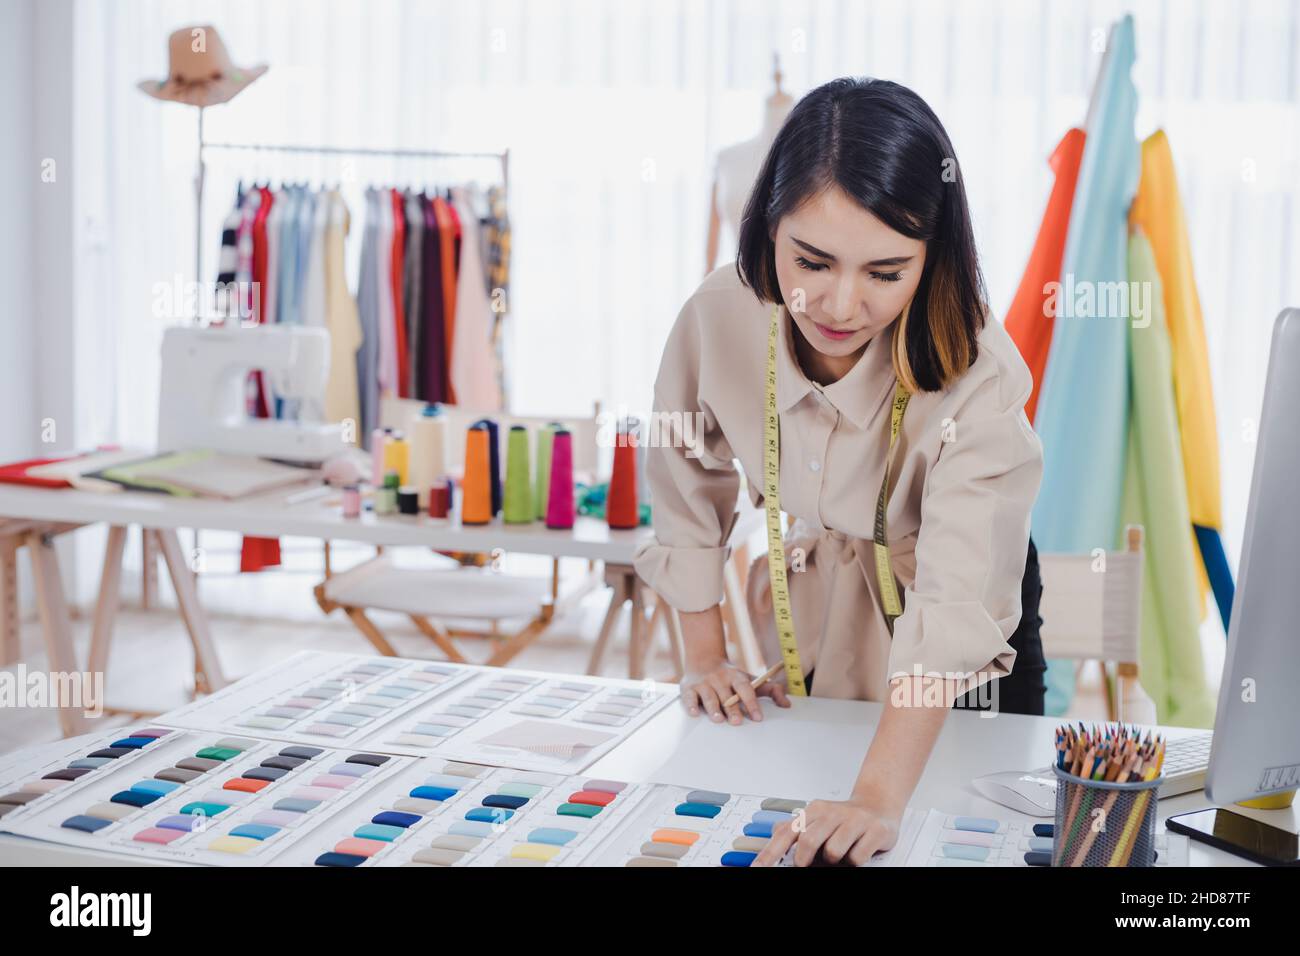 Asian woman designer are thinking and designing clothes for customers order items at the designer desk in the studio. Clothes designers are working in Stock Photo